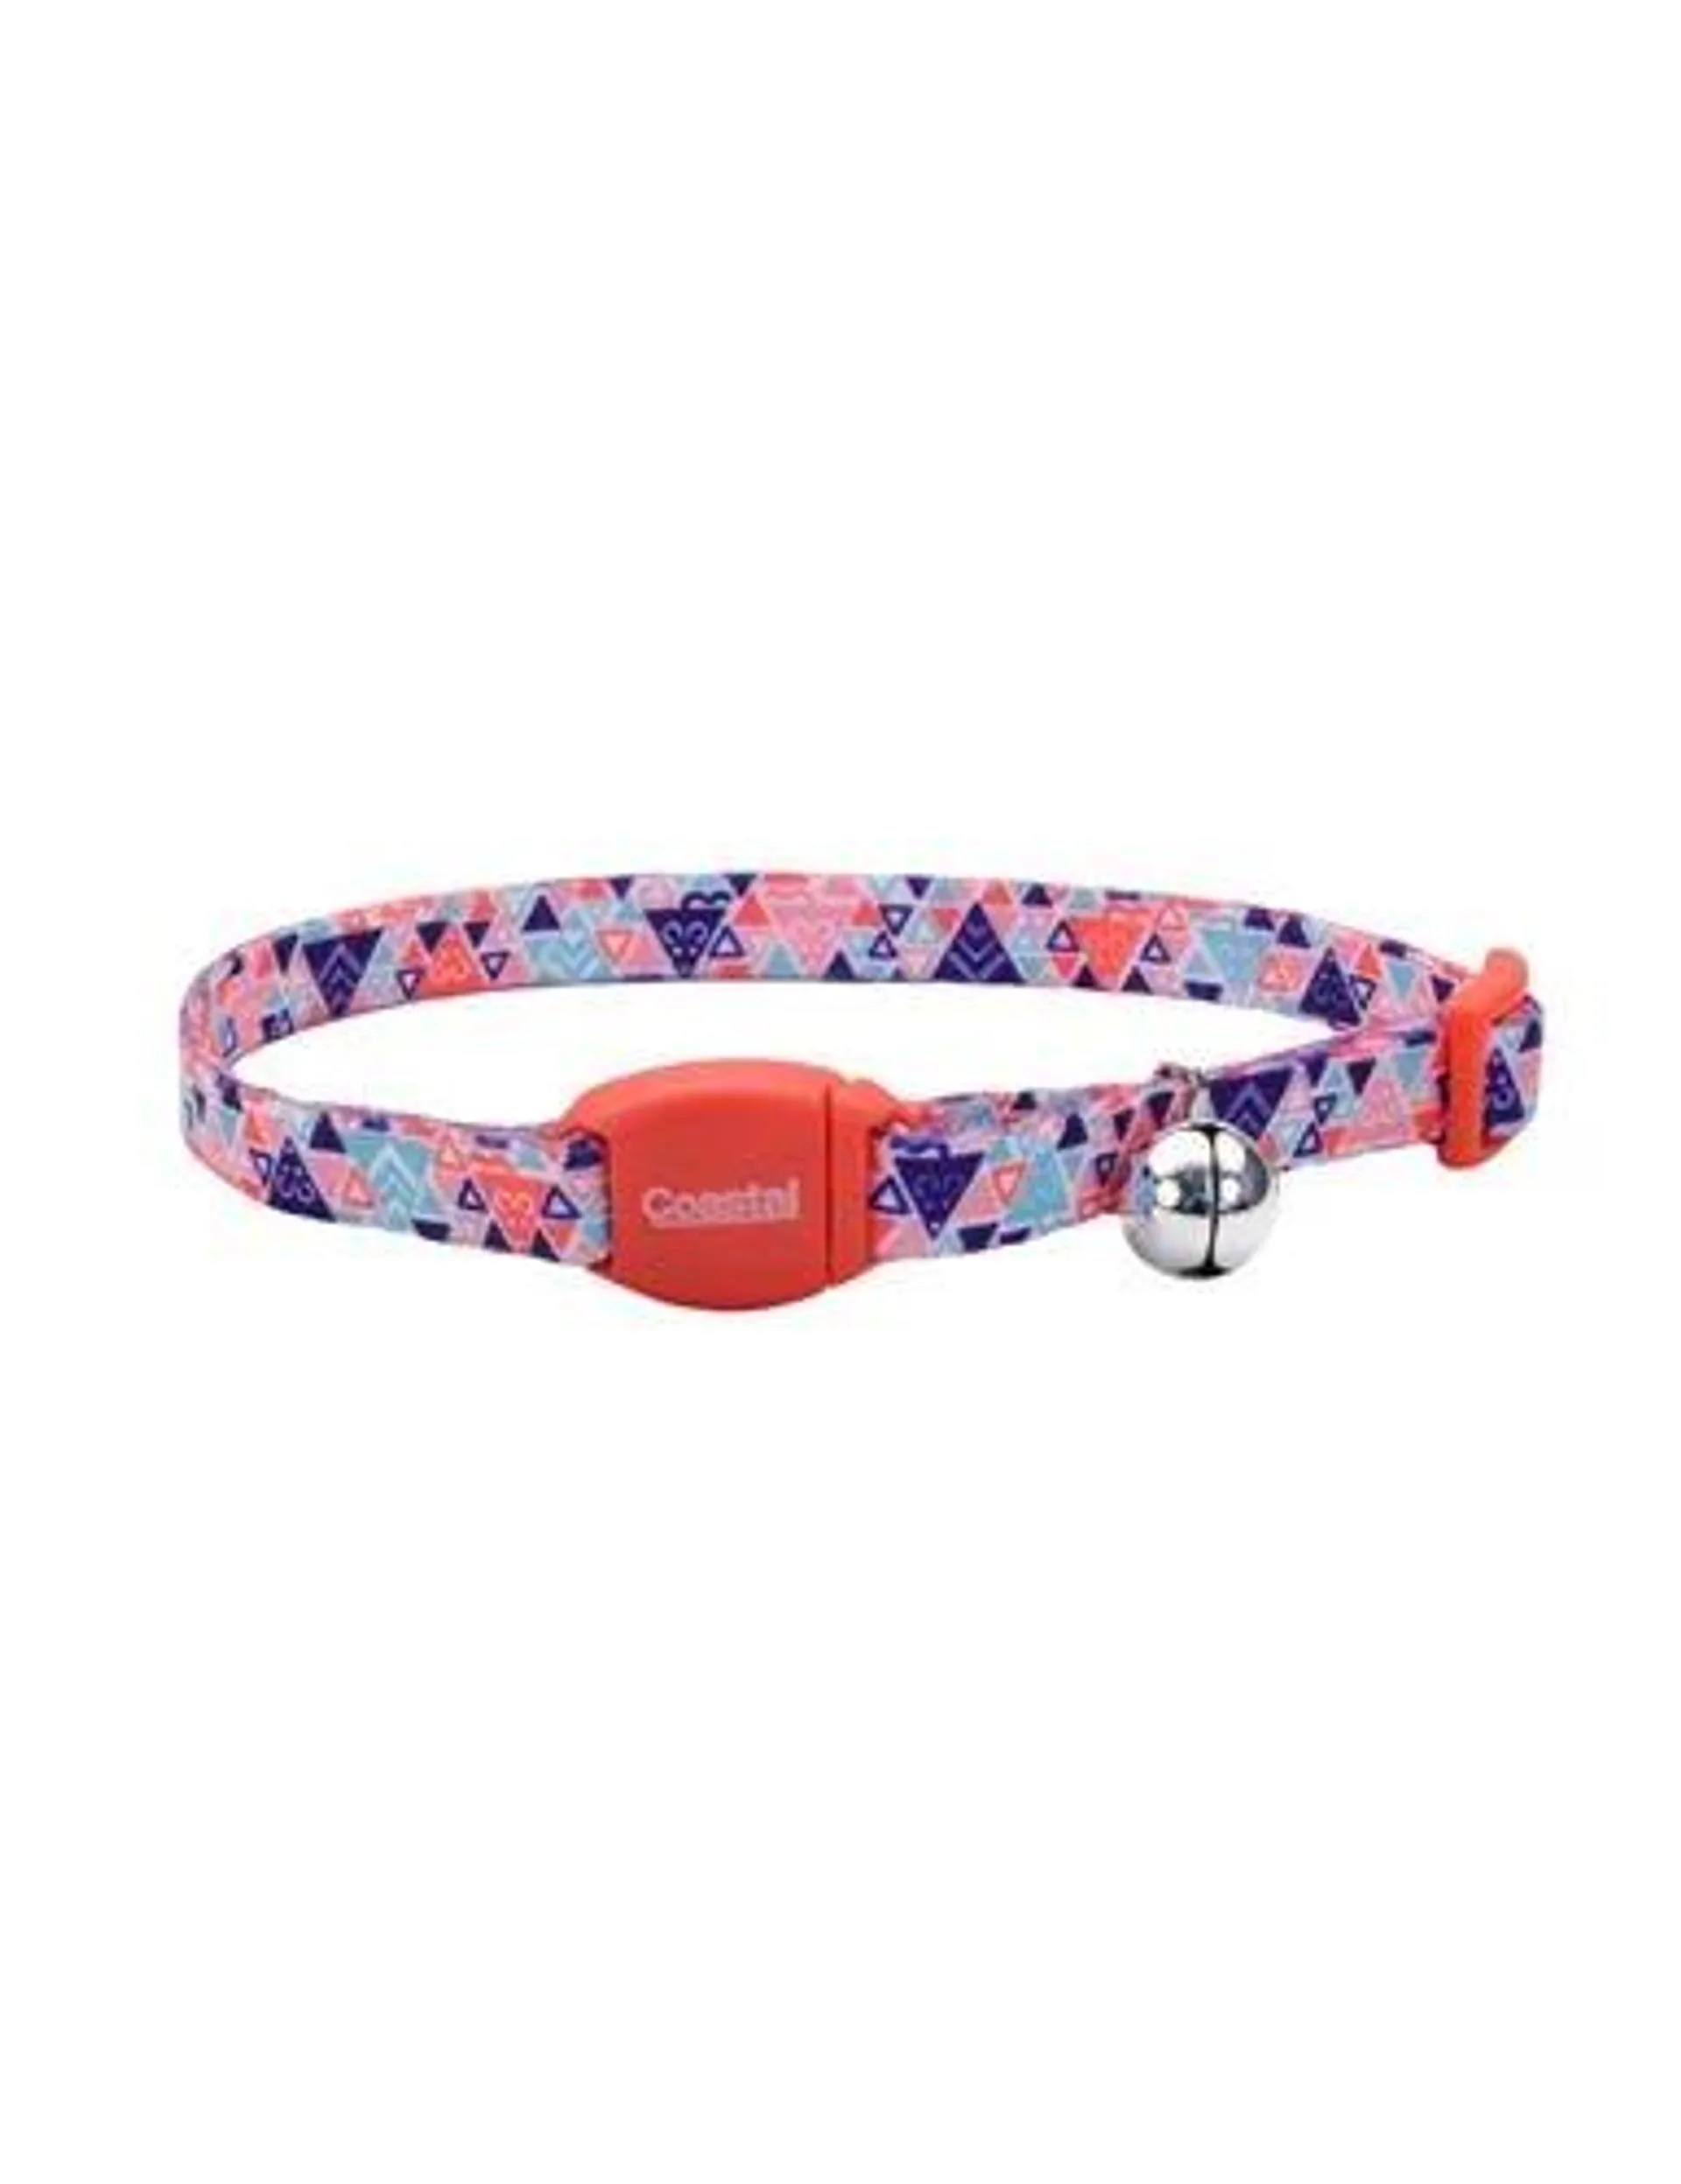 Safe Cat® Adjustable Breakaway Cat Collar with Magnetic Buckle, Multi-Colored Triangles, 3/8" x 08"-12"